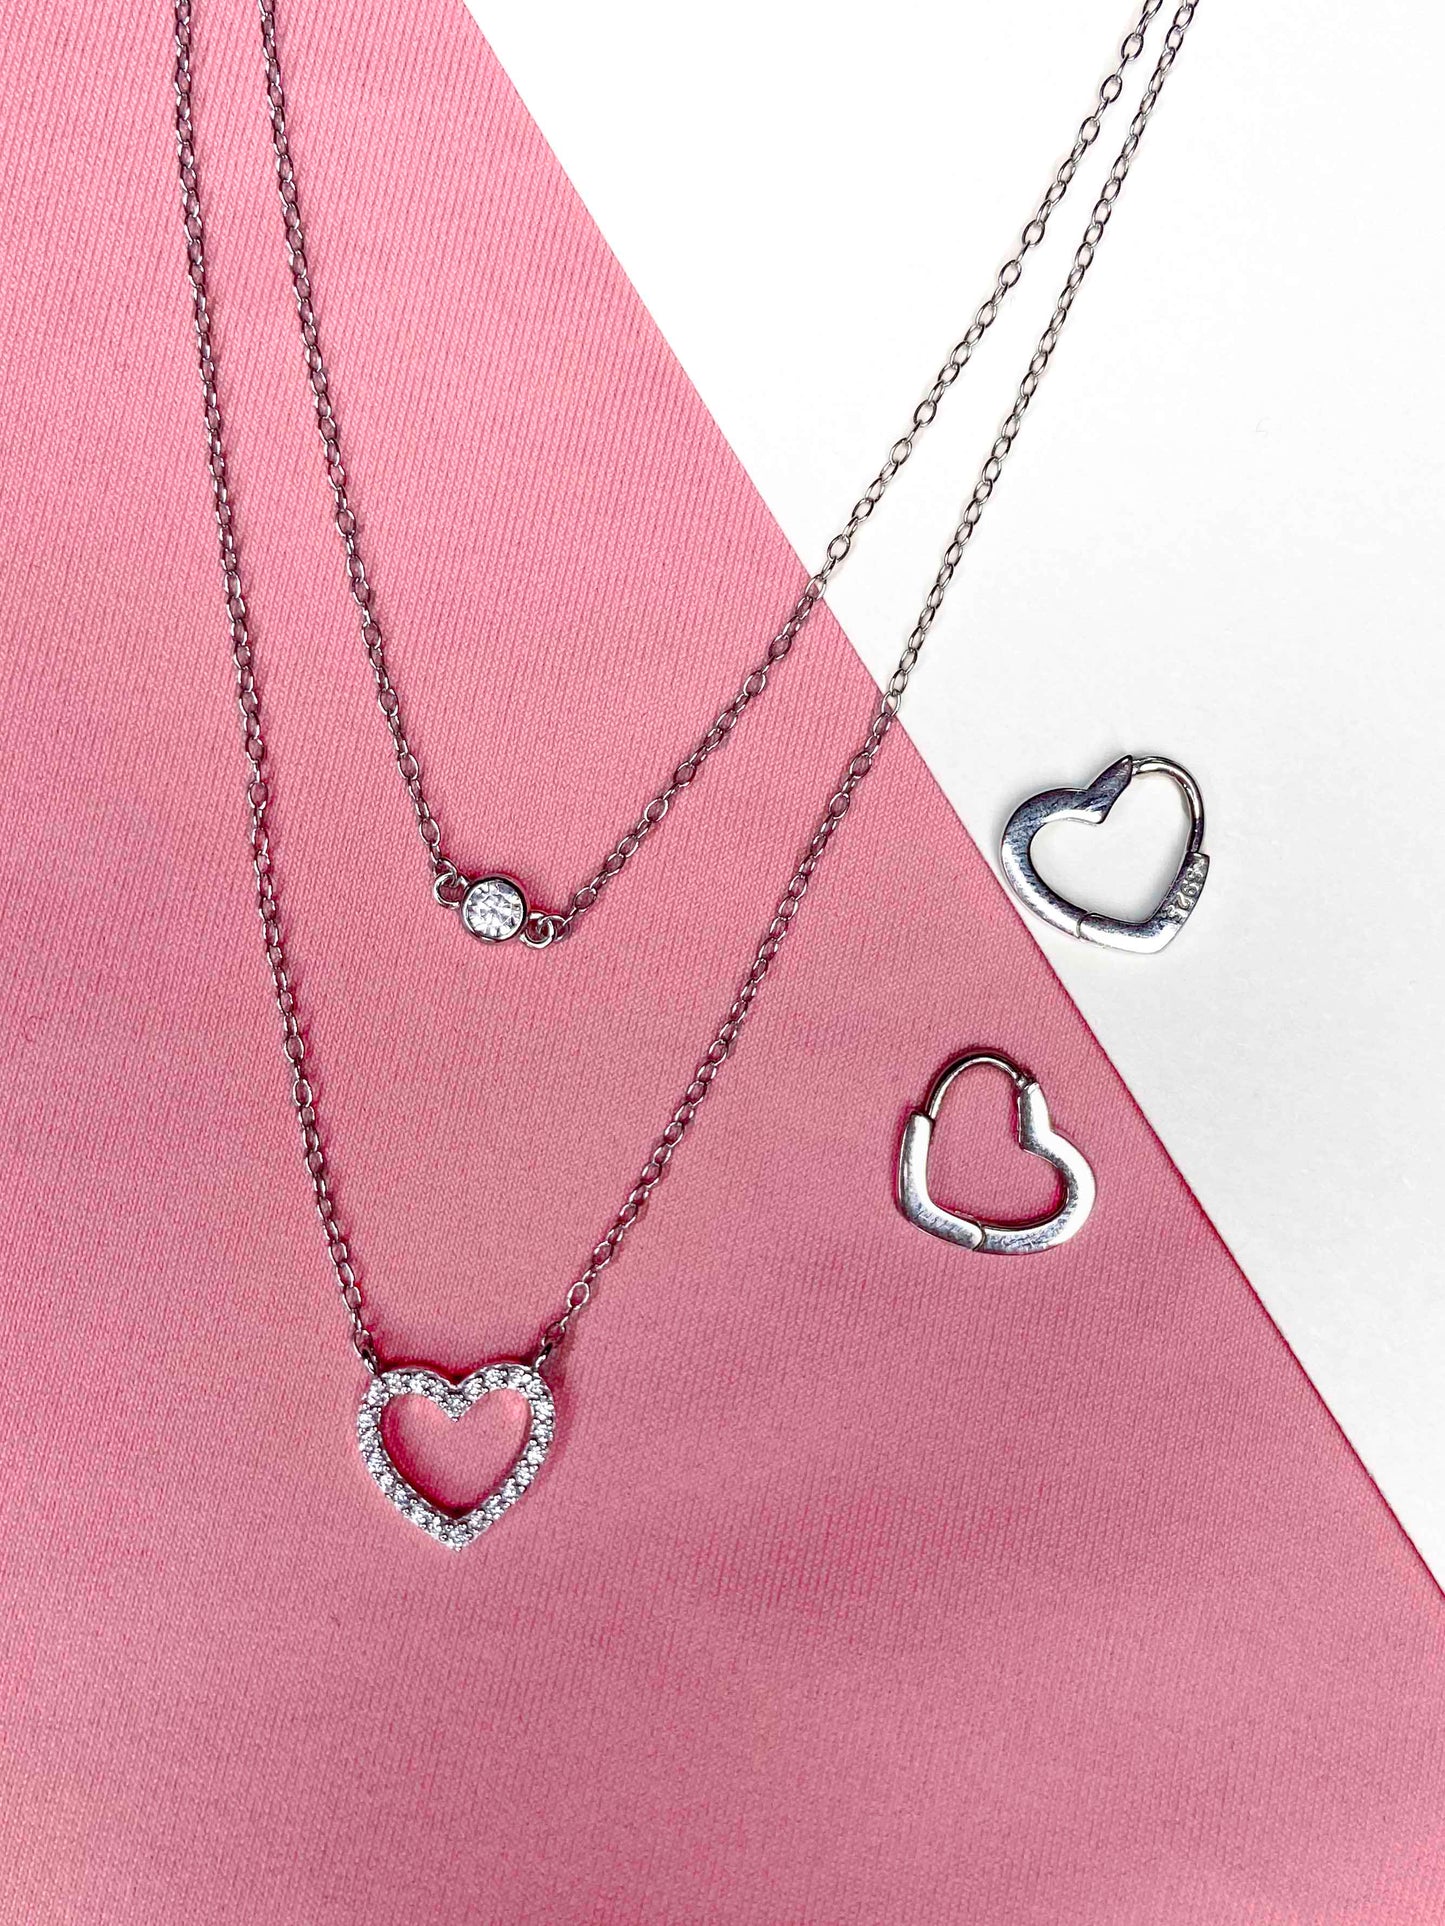 925 sterling silver double-layer necklace delicate clavicle chain zircon necklace, and heart hoop earrings.